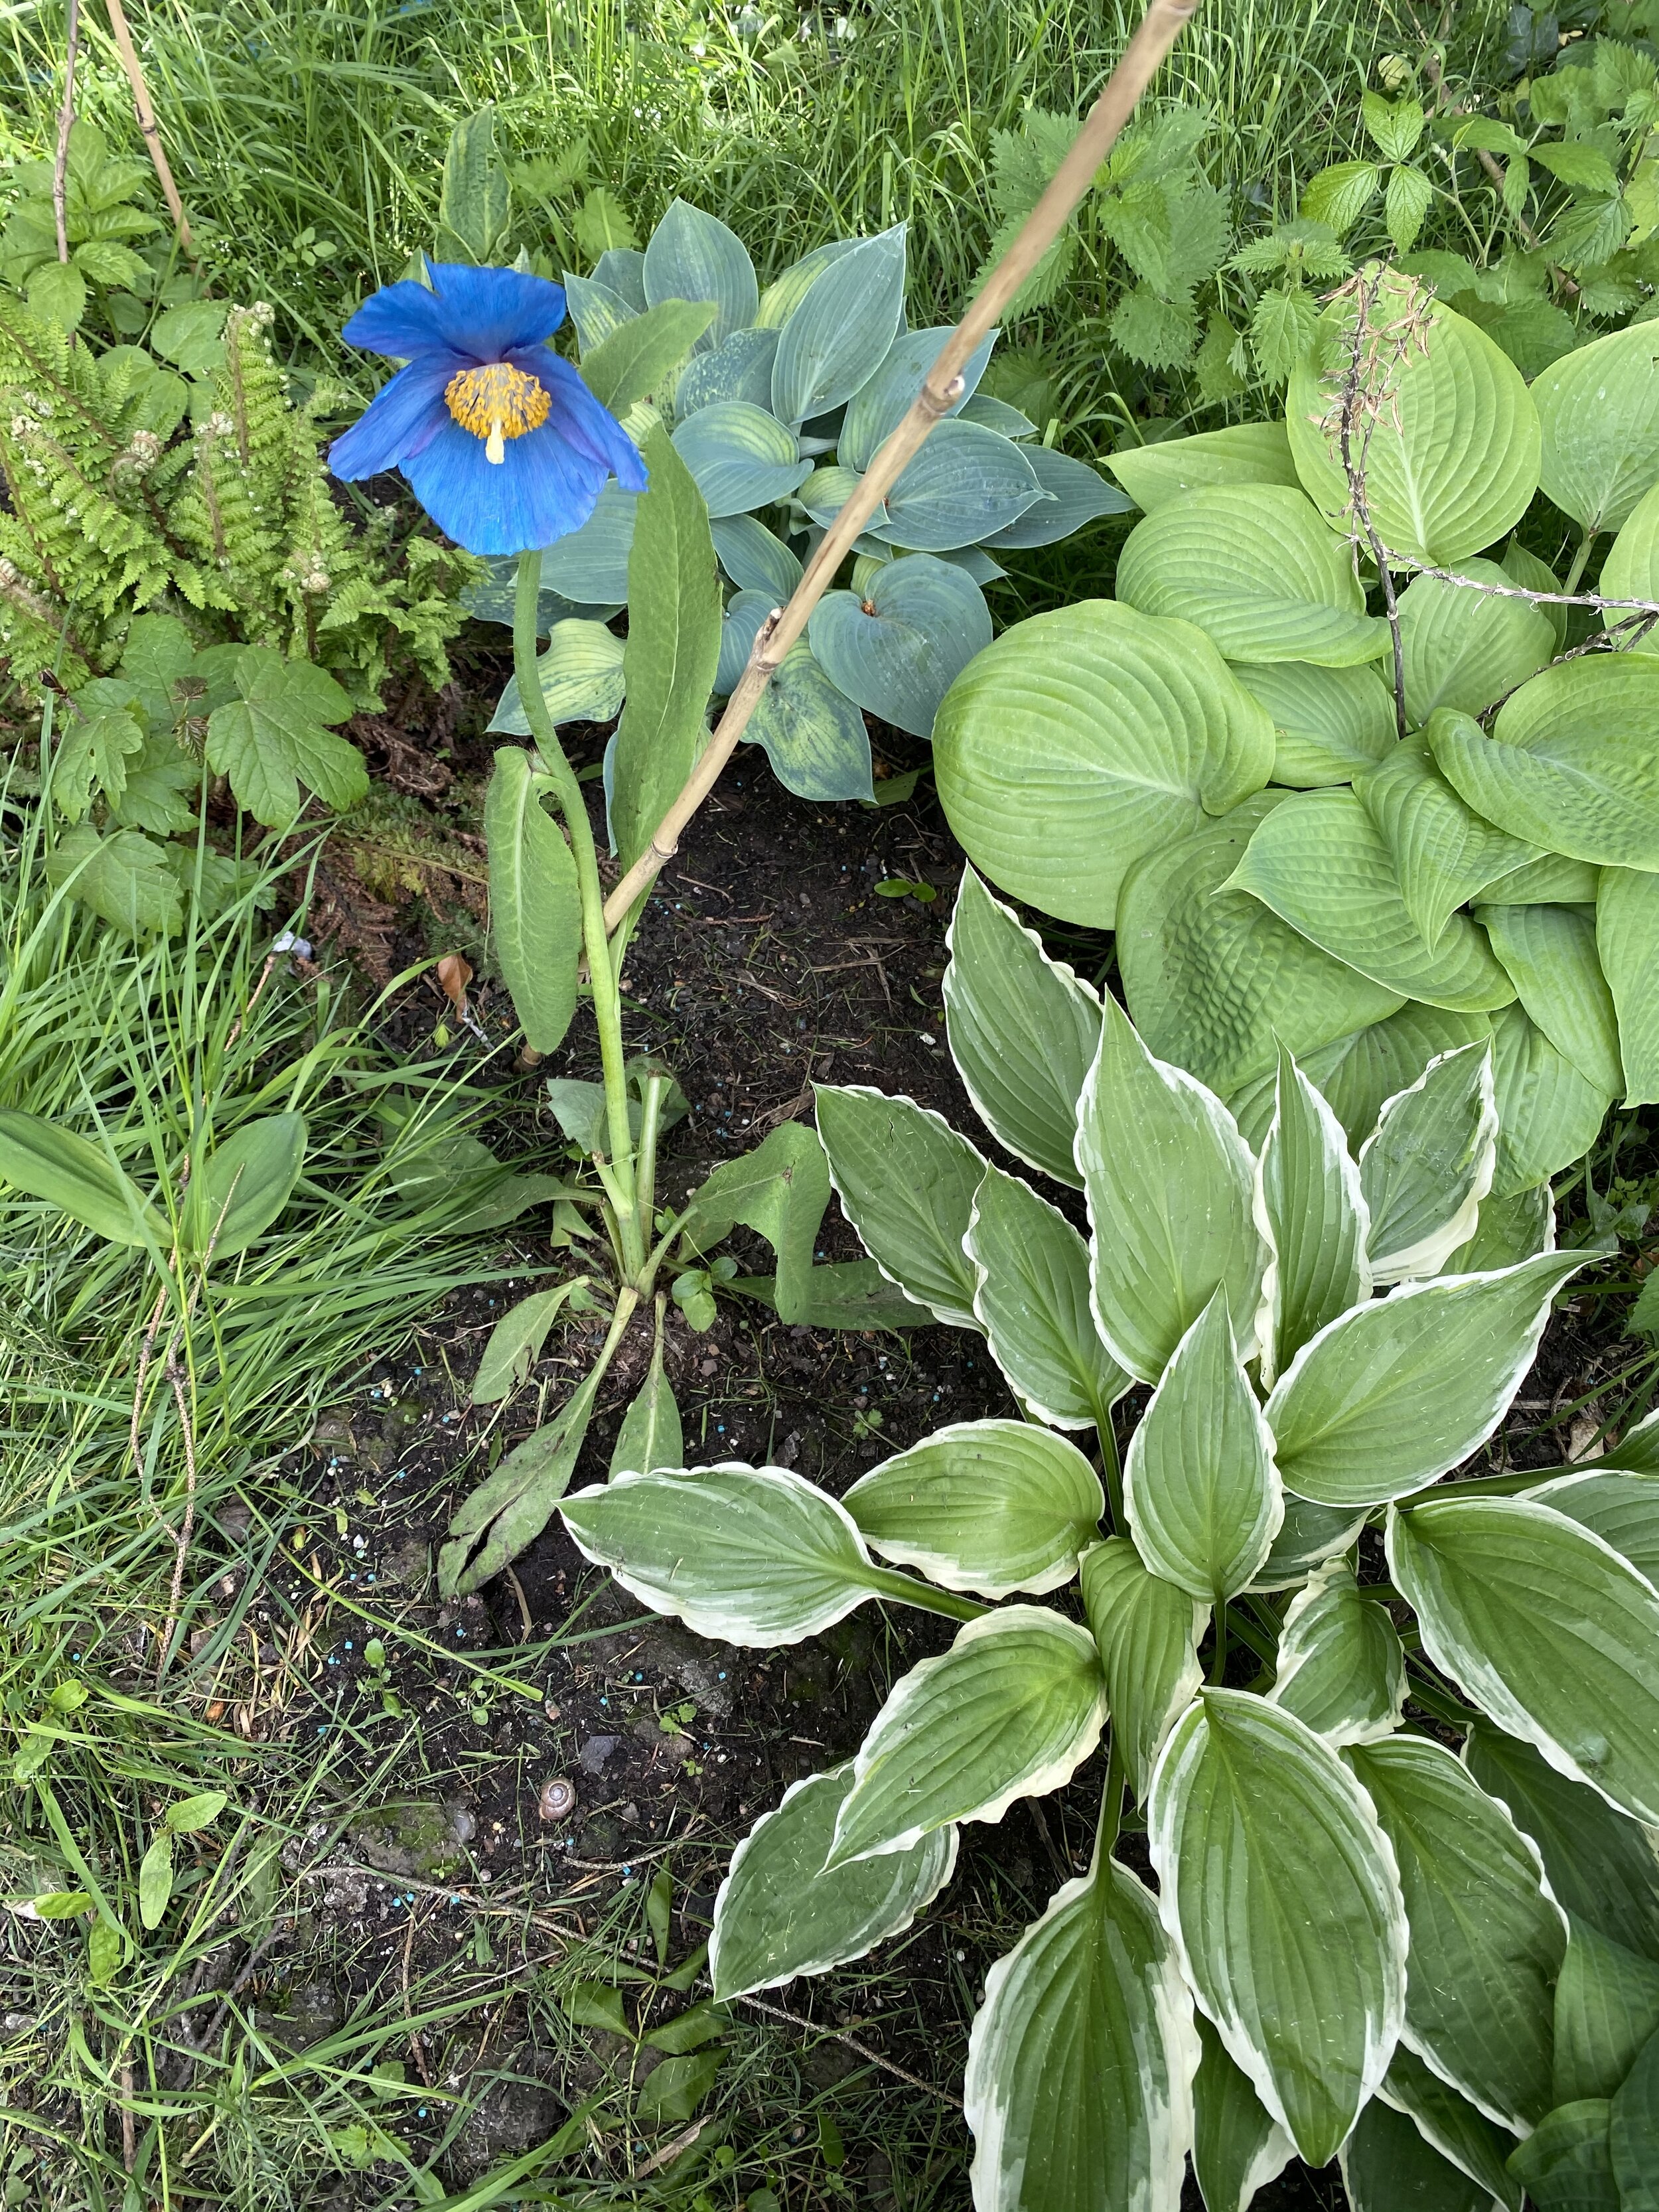 Hostas. A Meconopsis bloom appears, 12 May 2020. A sunny day